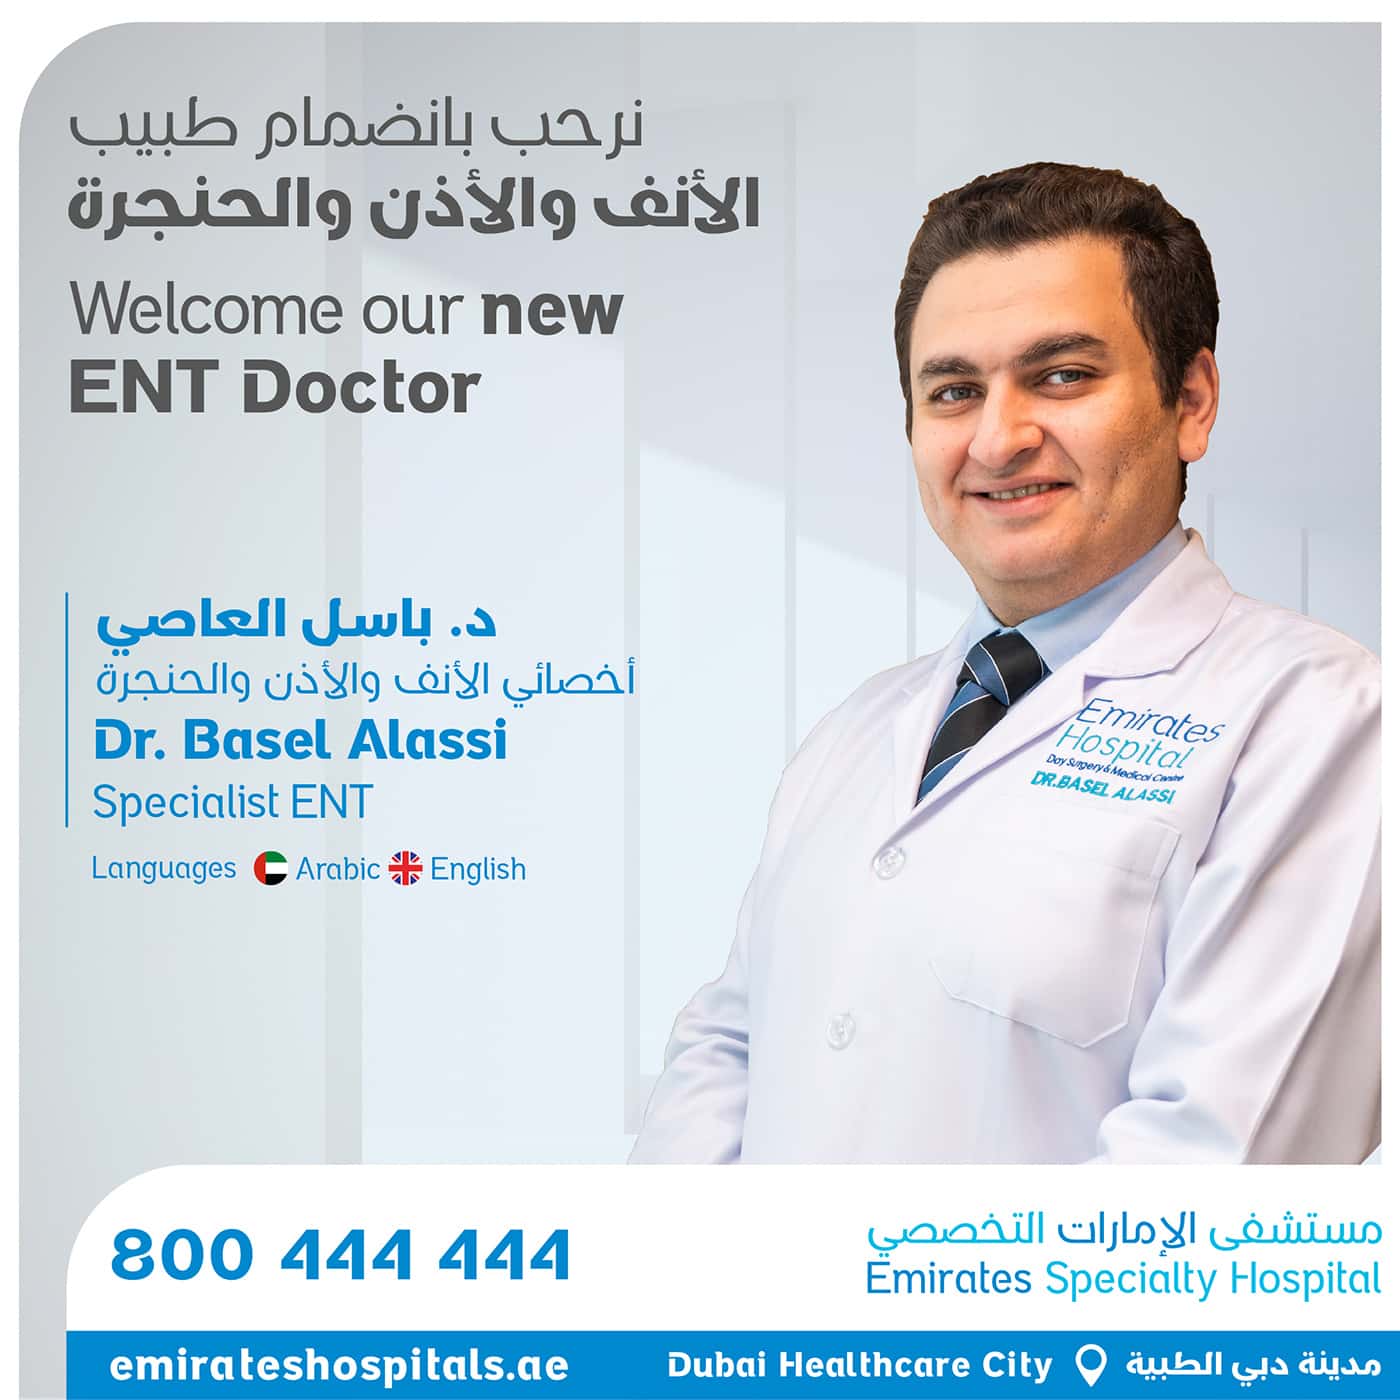 Dr.Basel Alassi , Specialist – ENT Joined Emirates Specialty Hospital